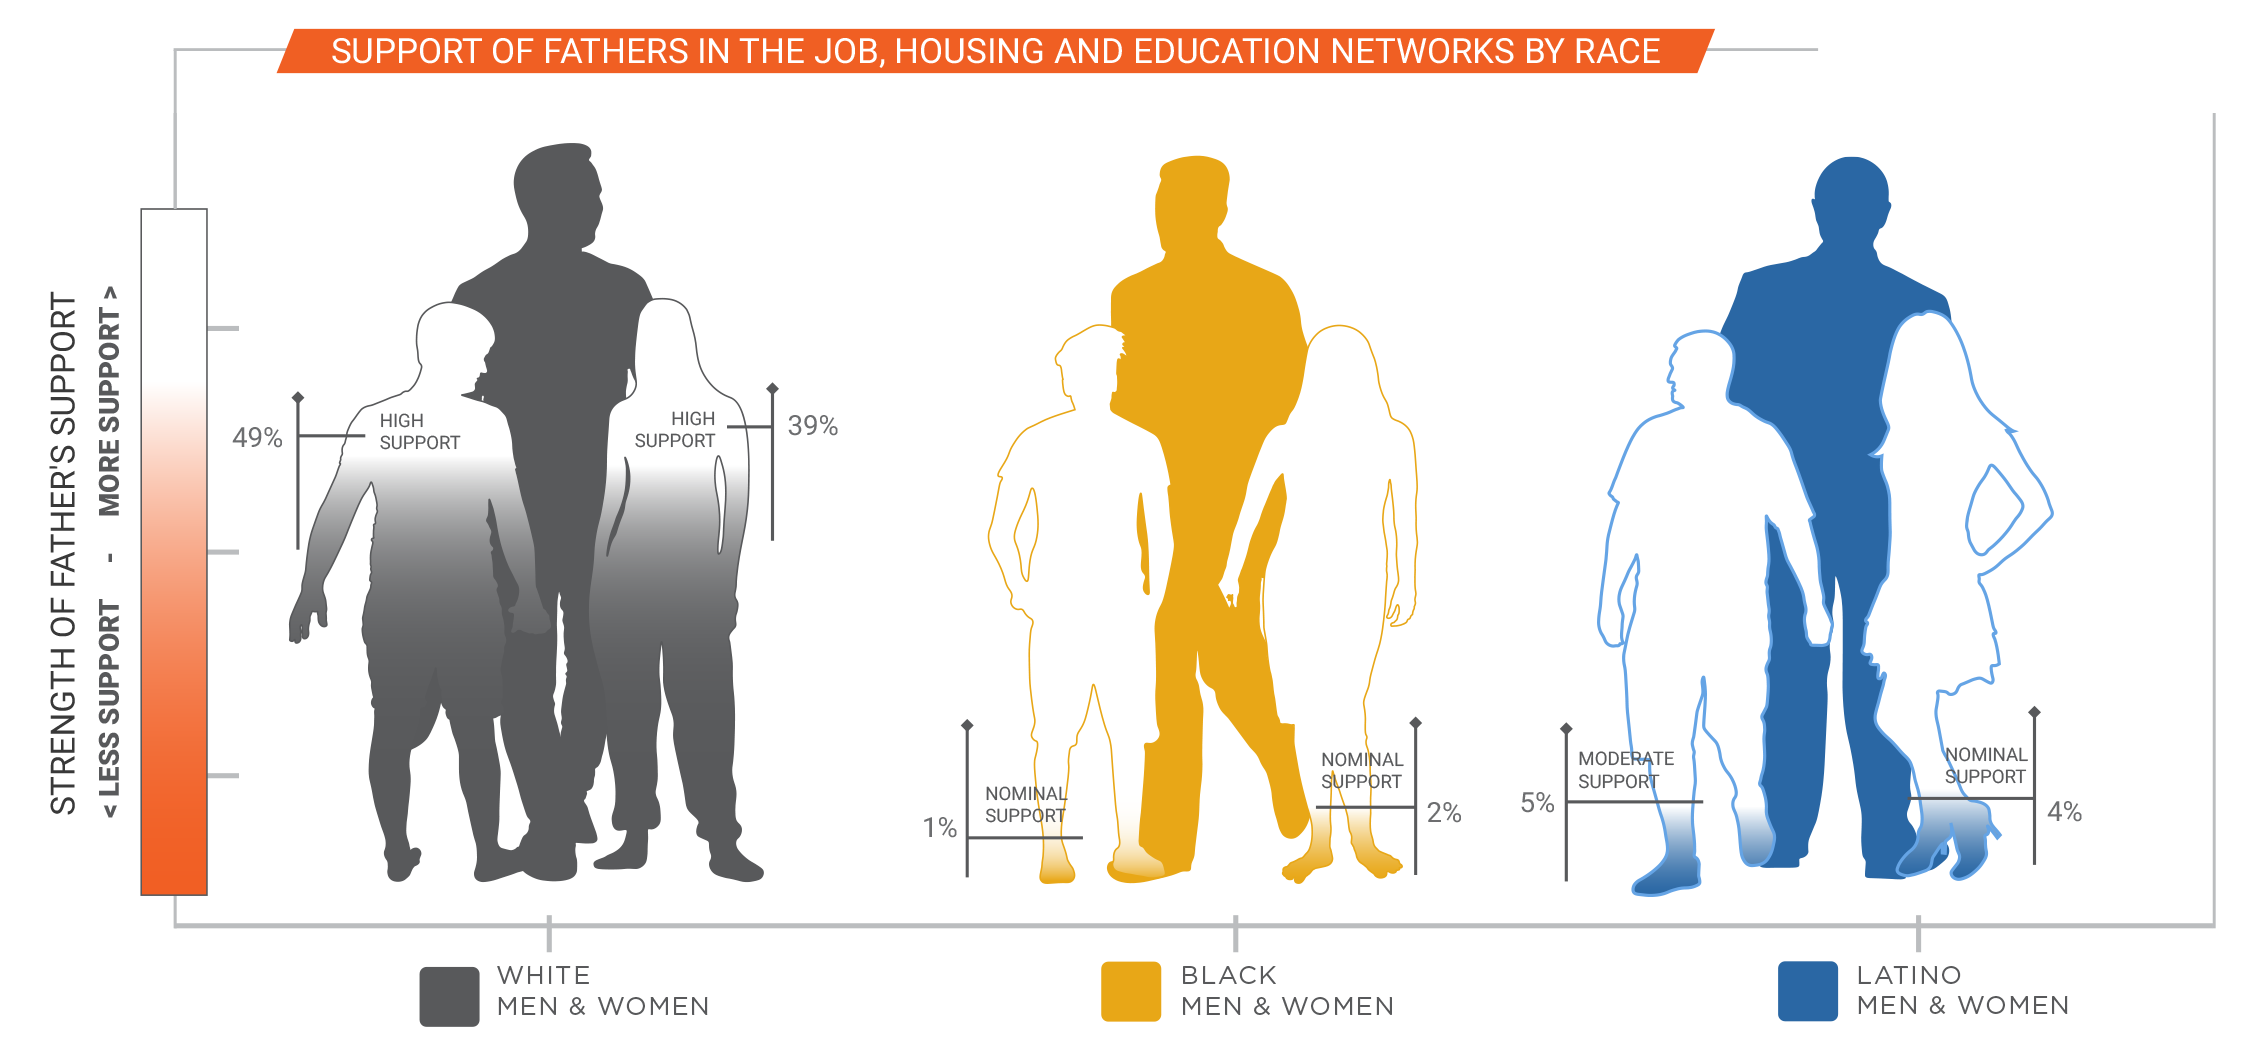 Support of fathers in the job, housing and education networks by race